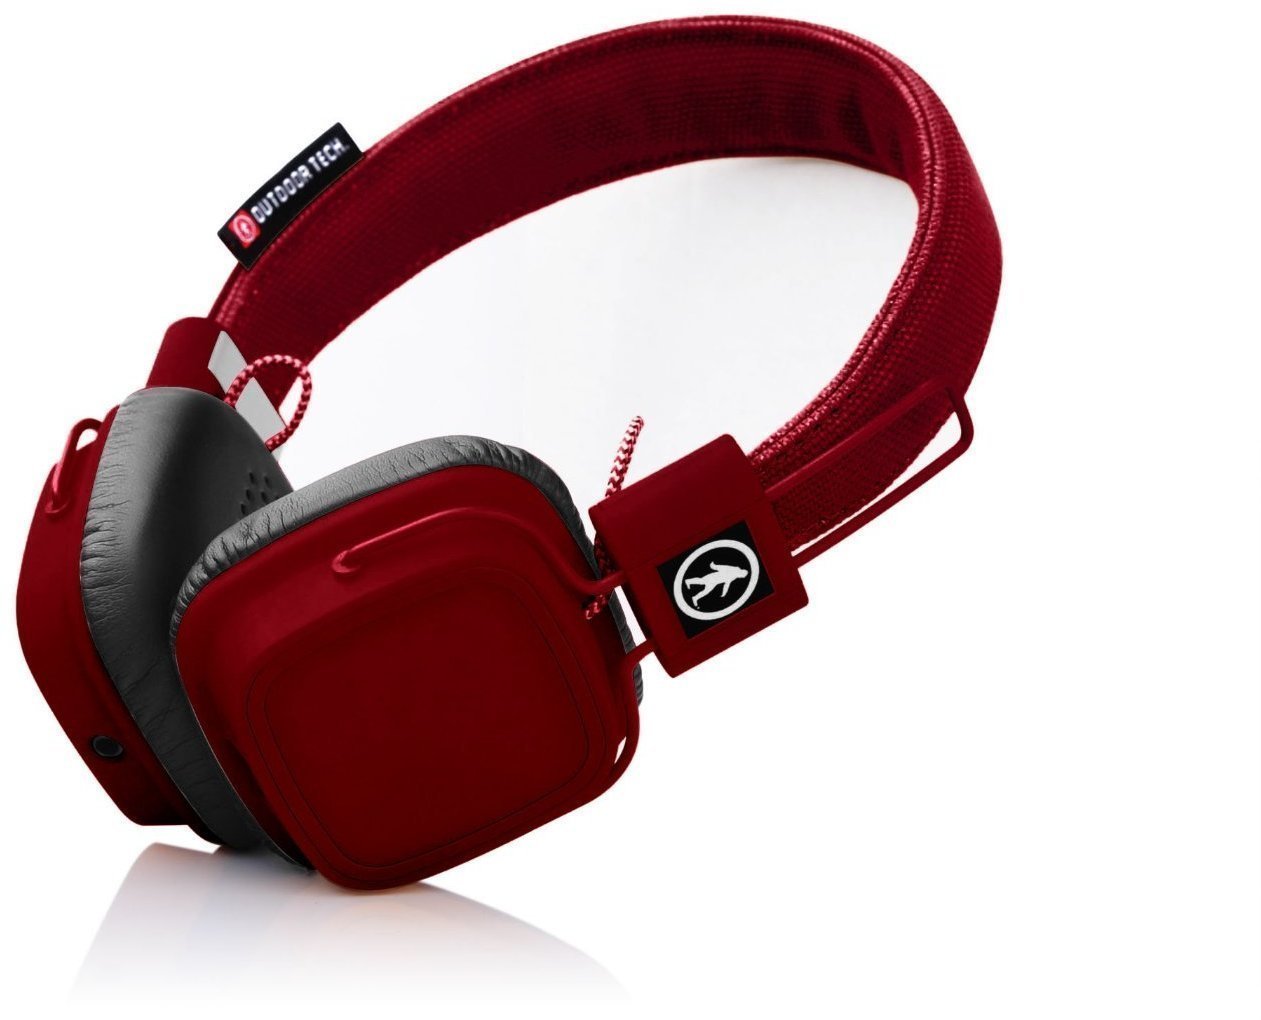 Broadcast Headset Outdoor Tech Privates - Wireless Touch Control Headphones - Crimson